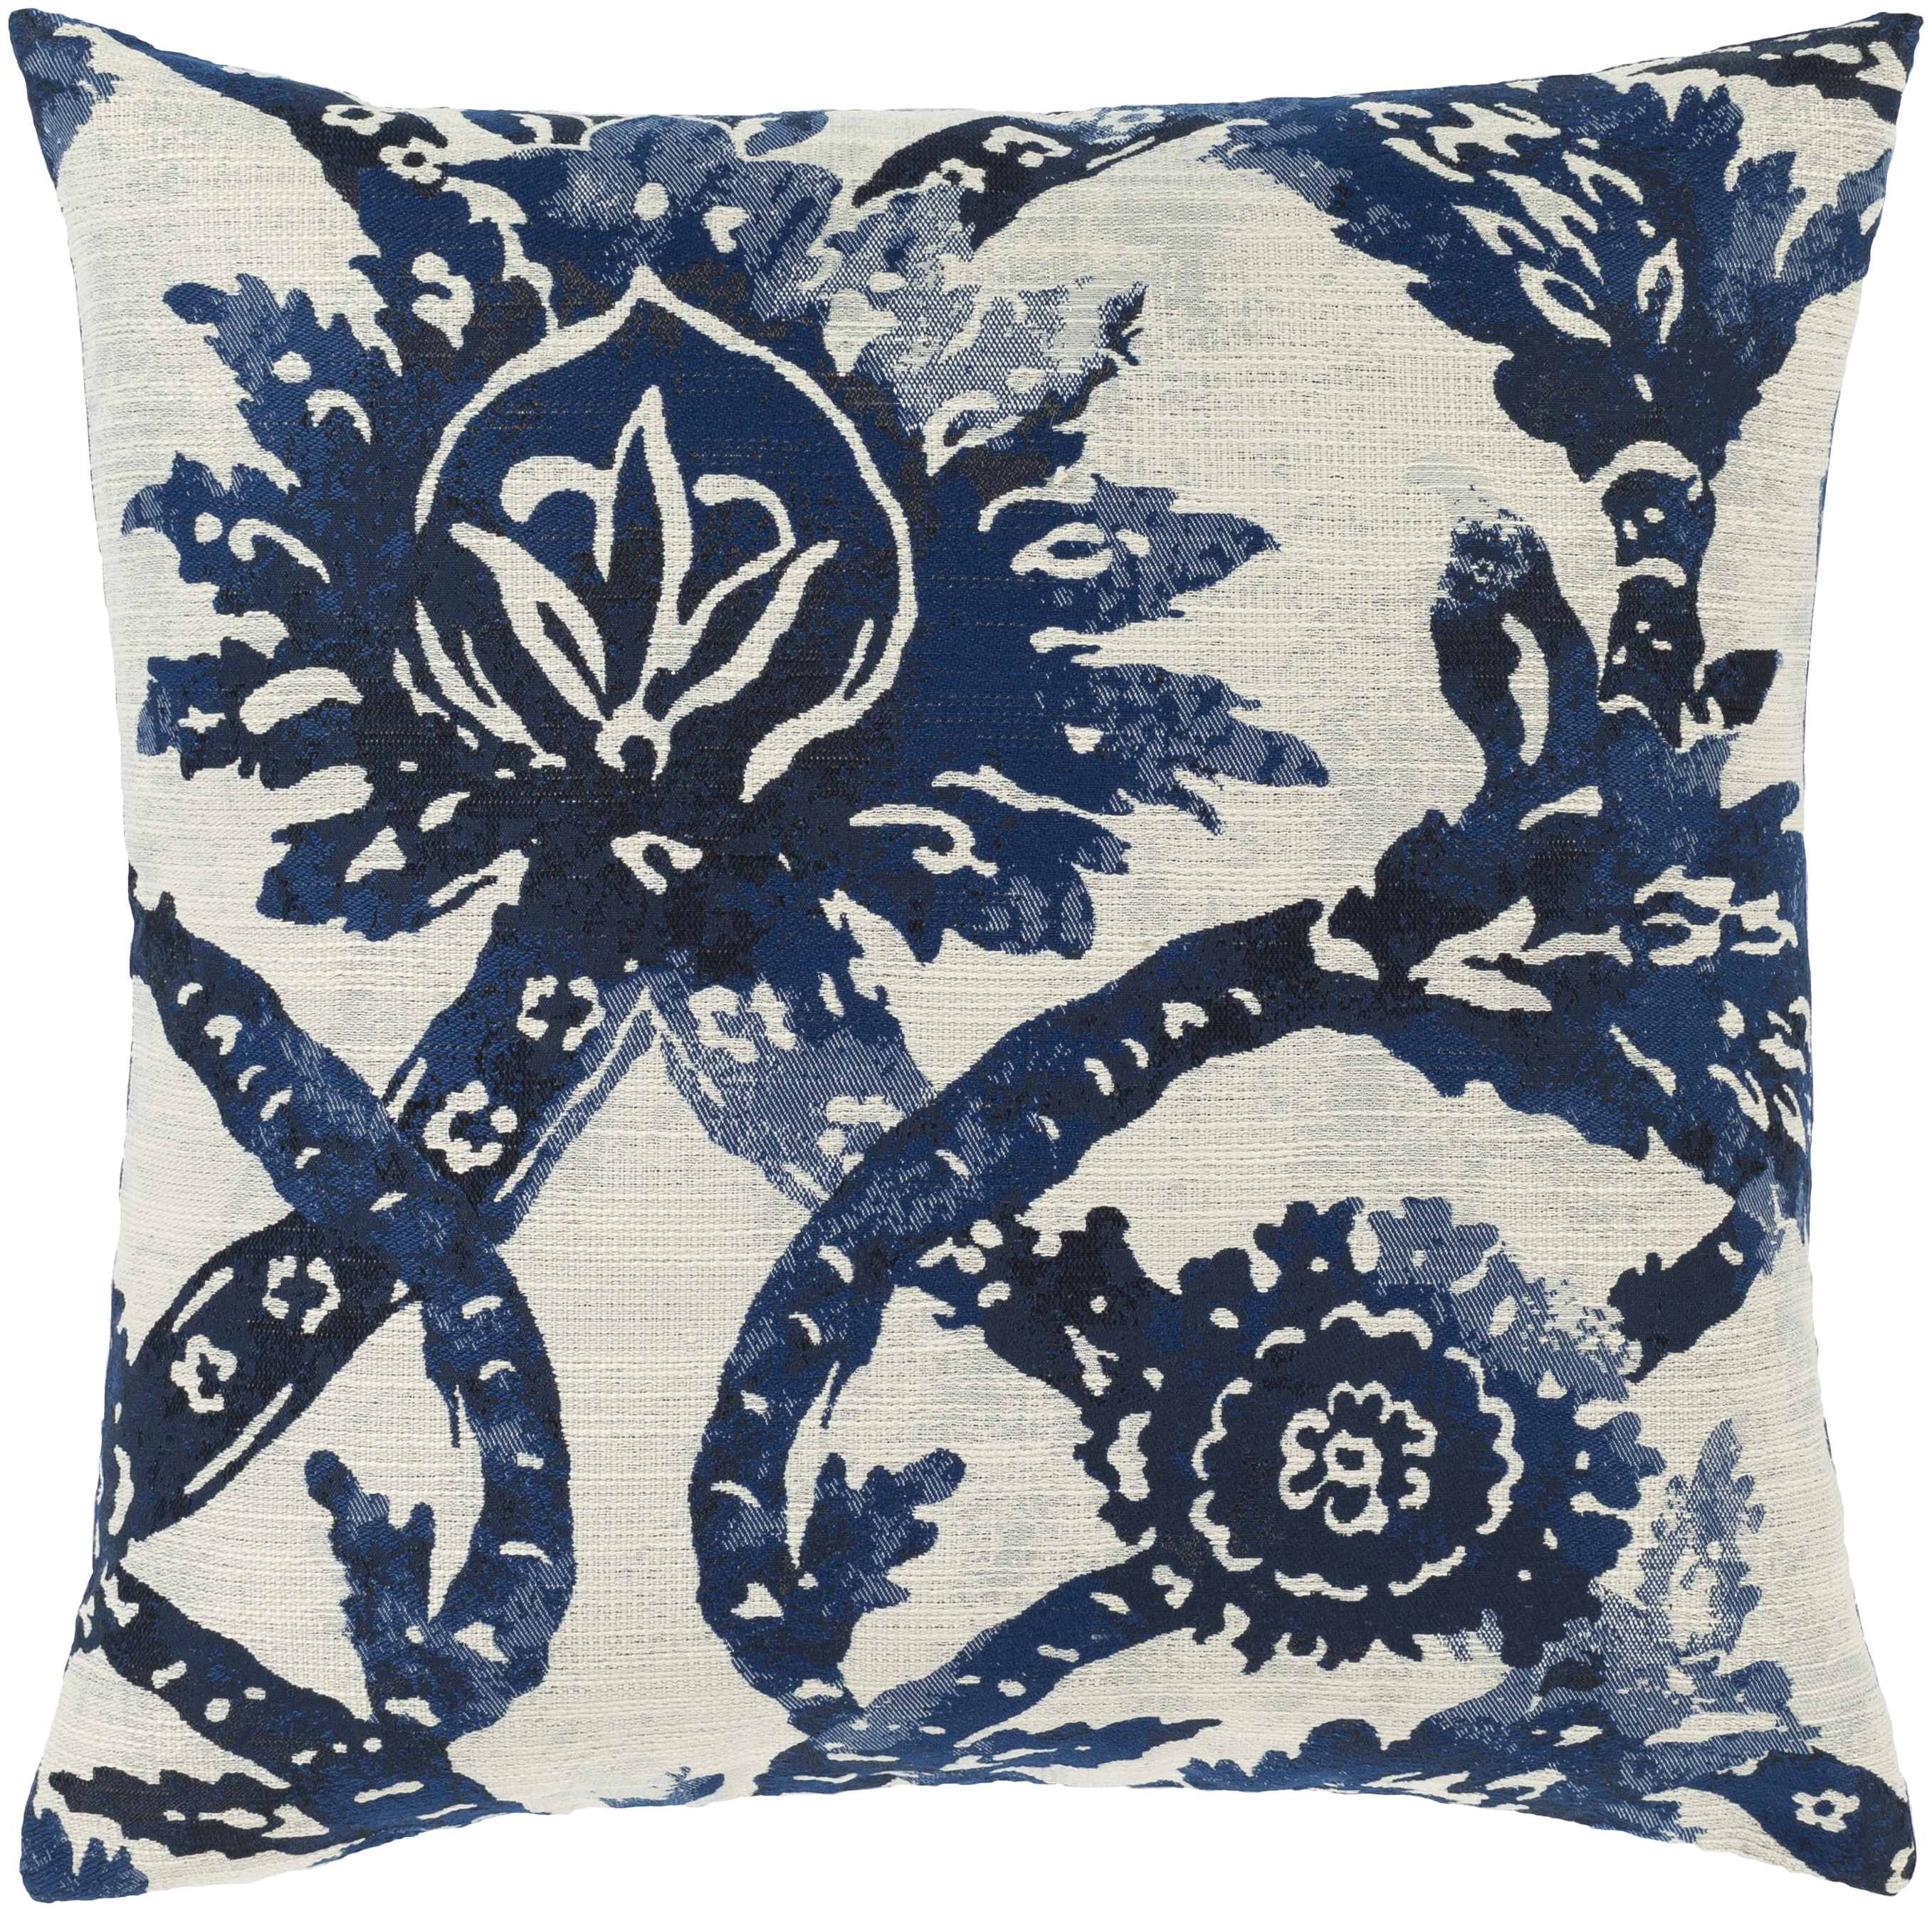 Sanya Bay Throw Pillow, 20" x 20", pillow cover only - Image 0